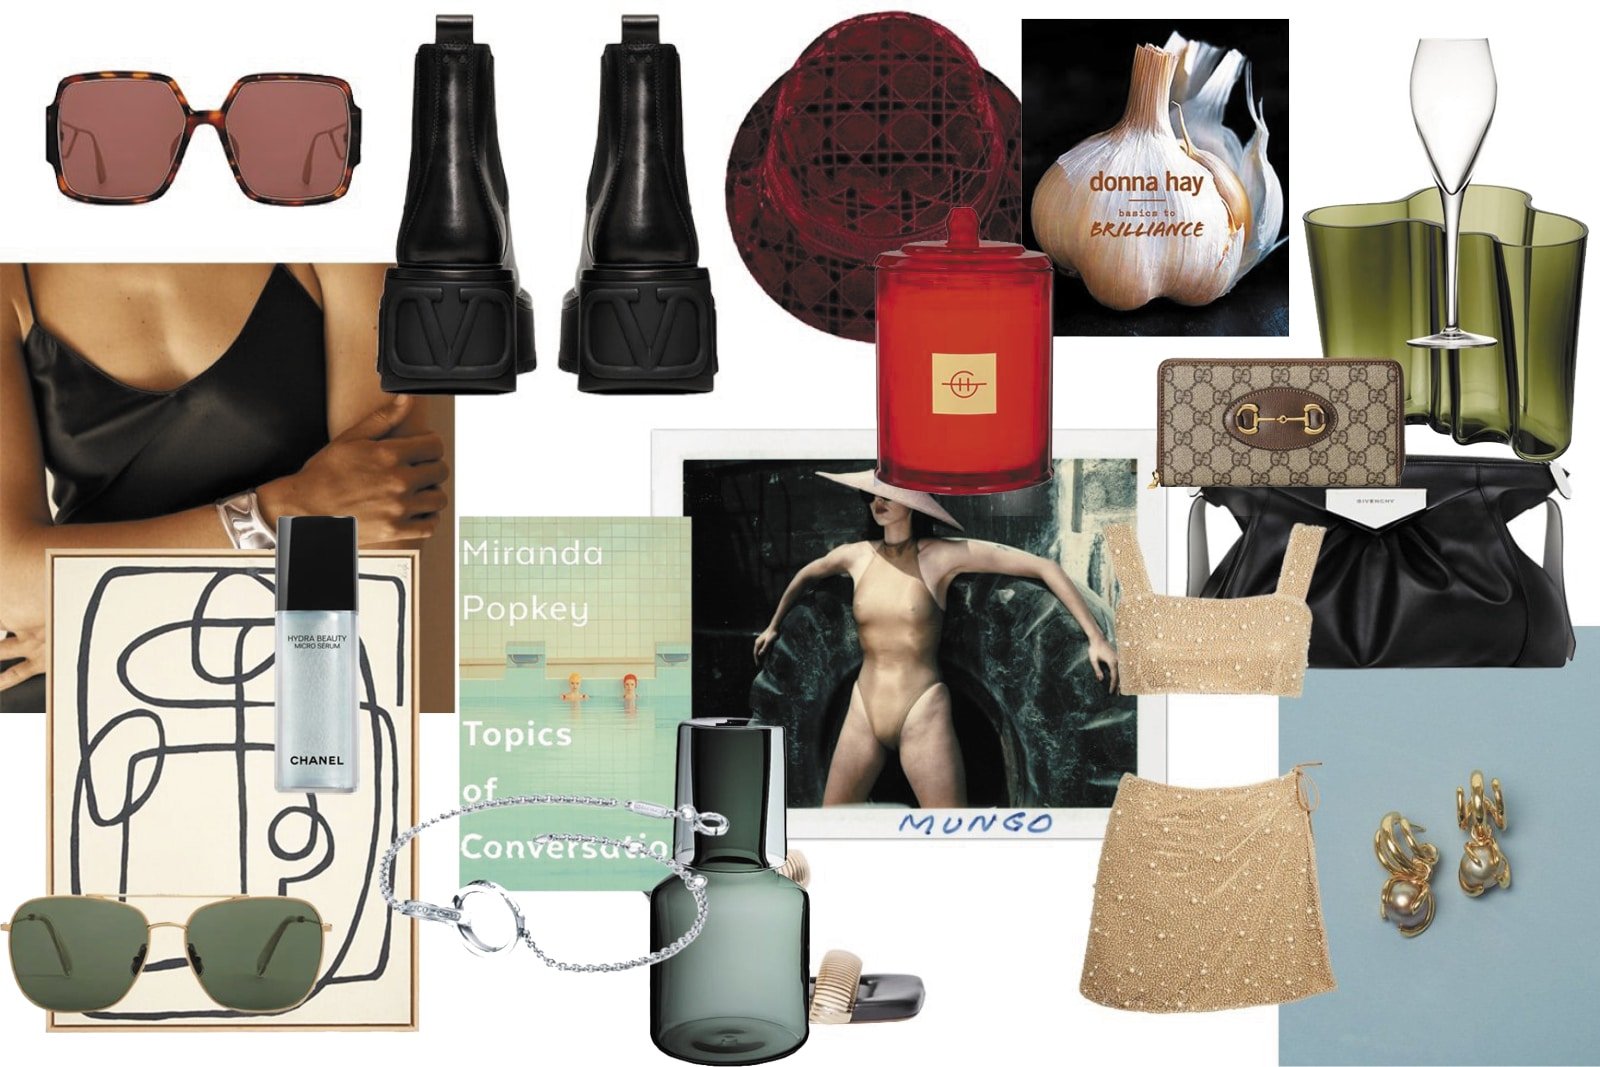 Aesop, Chanel, and More: A Christmas 2022 Gift Guide for Beauty Lovers